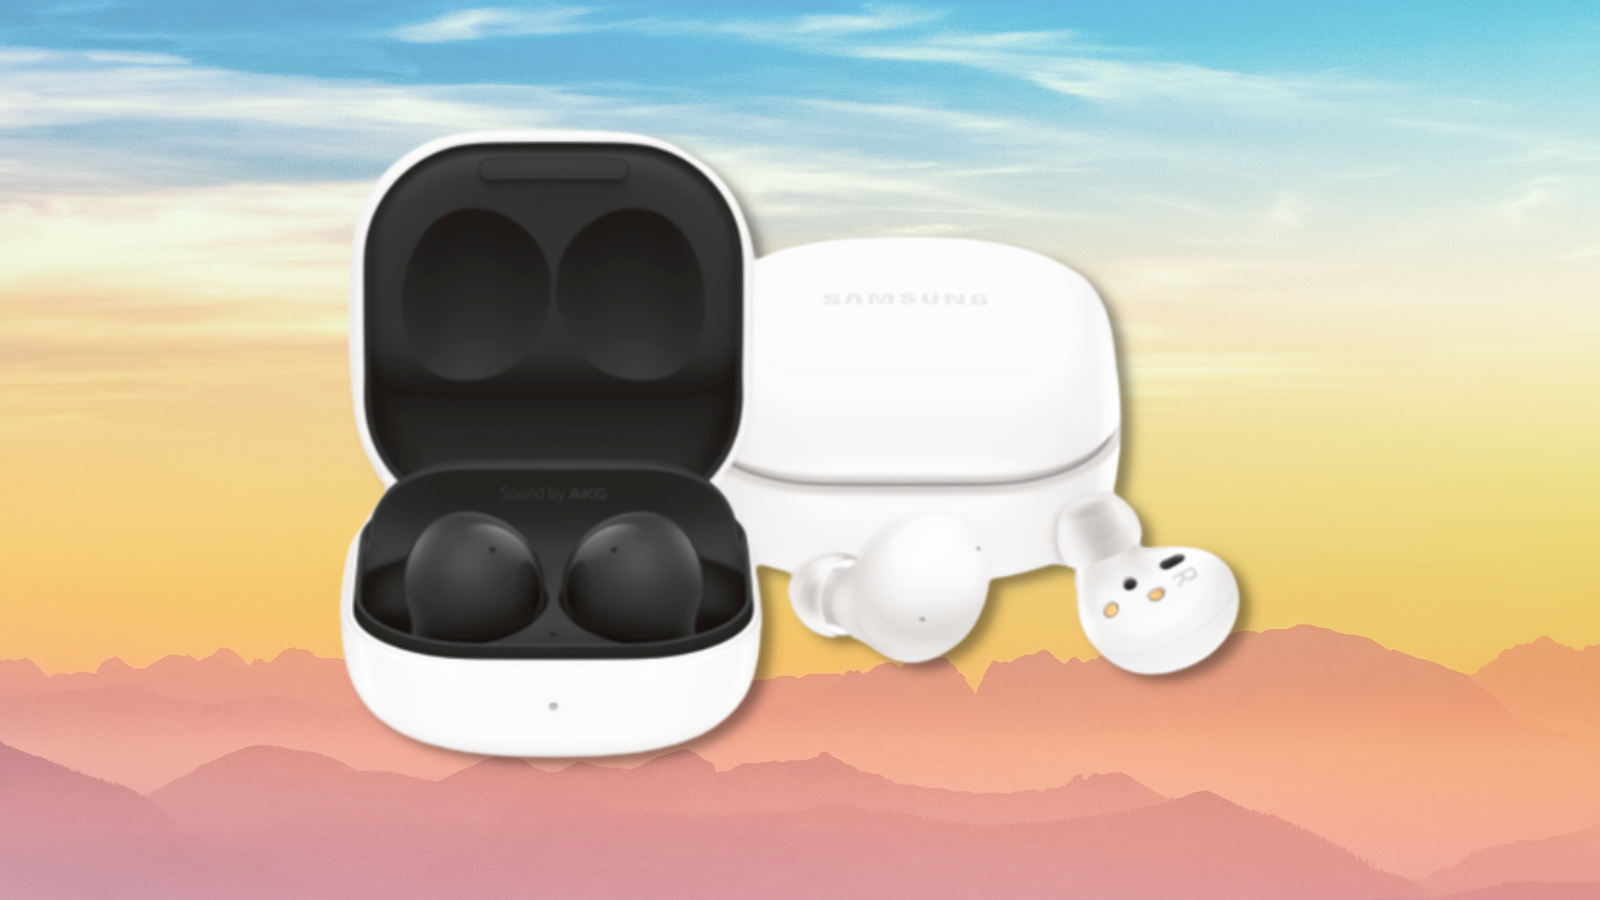 Samsung galaxy buds 2 in black and white with colorful background